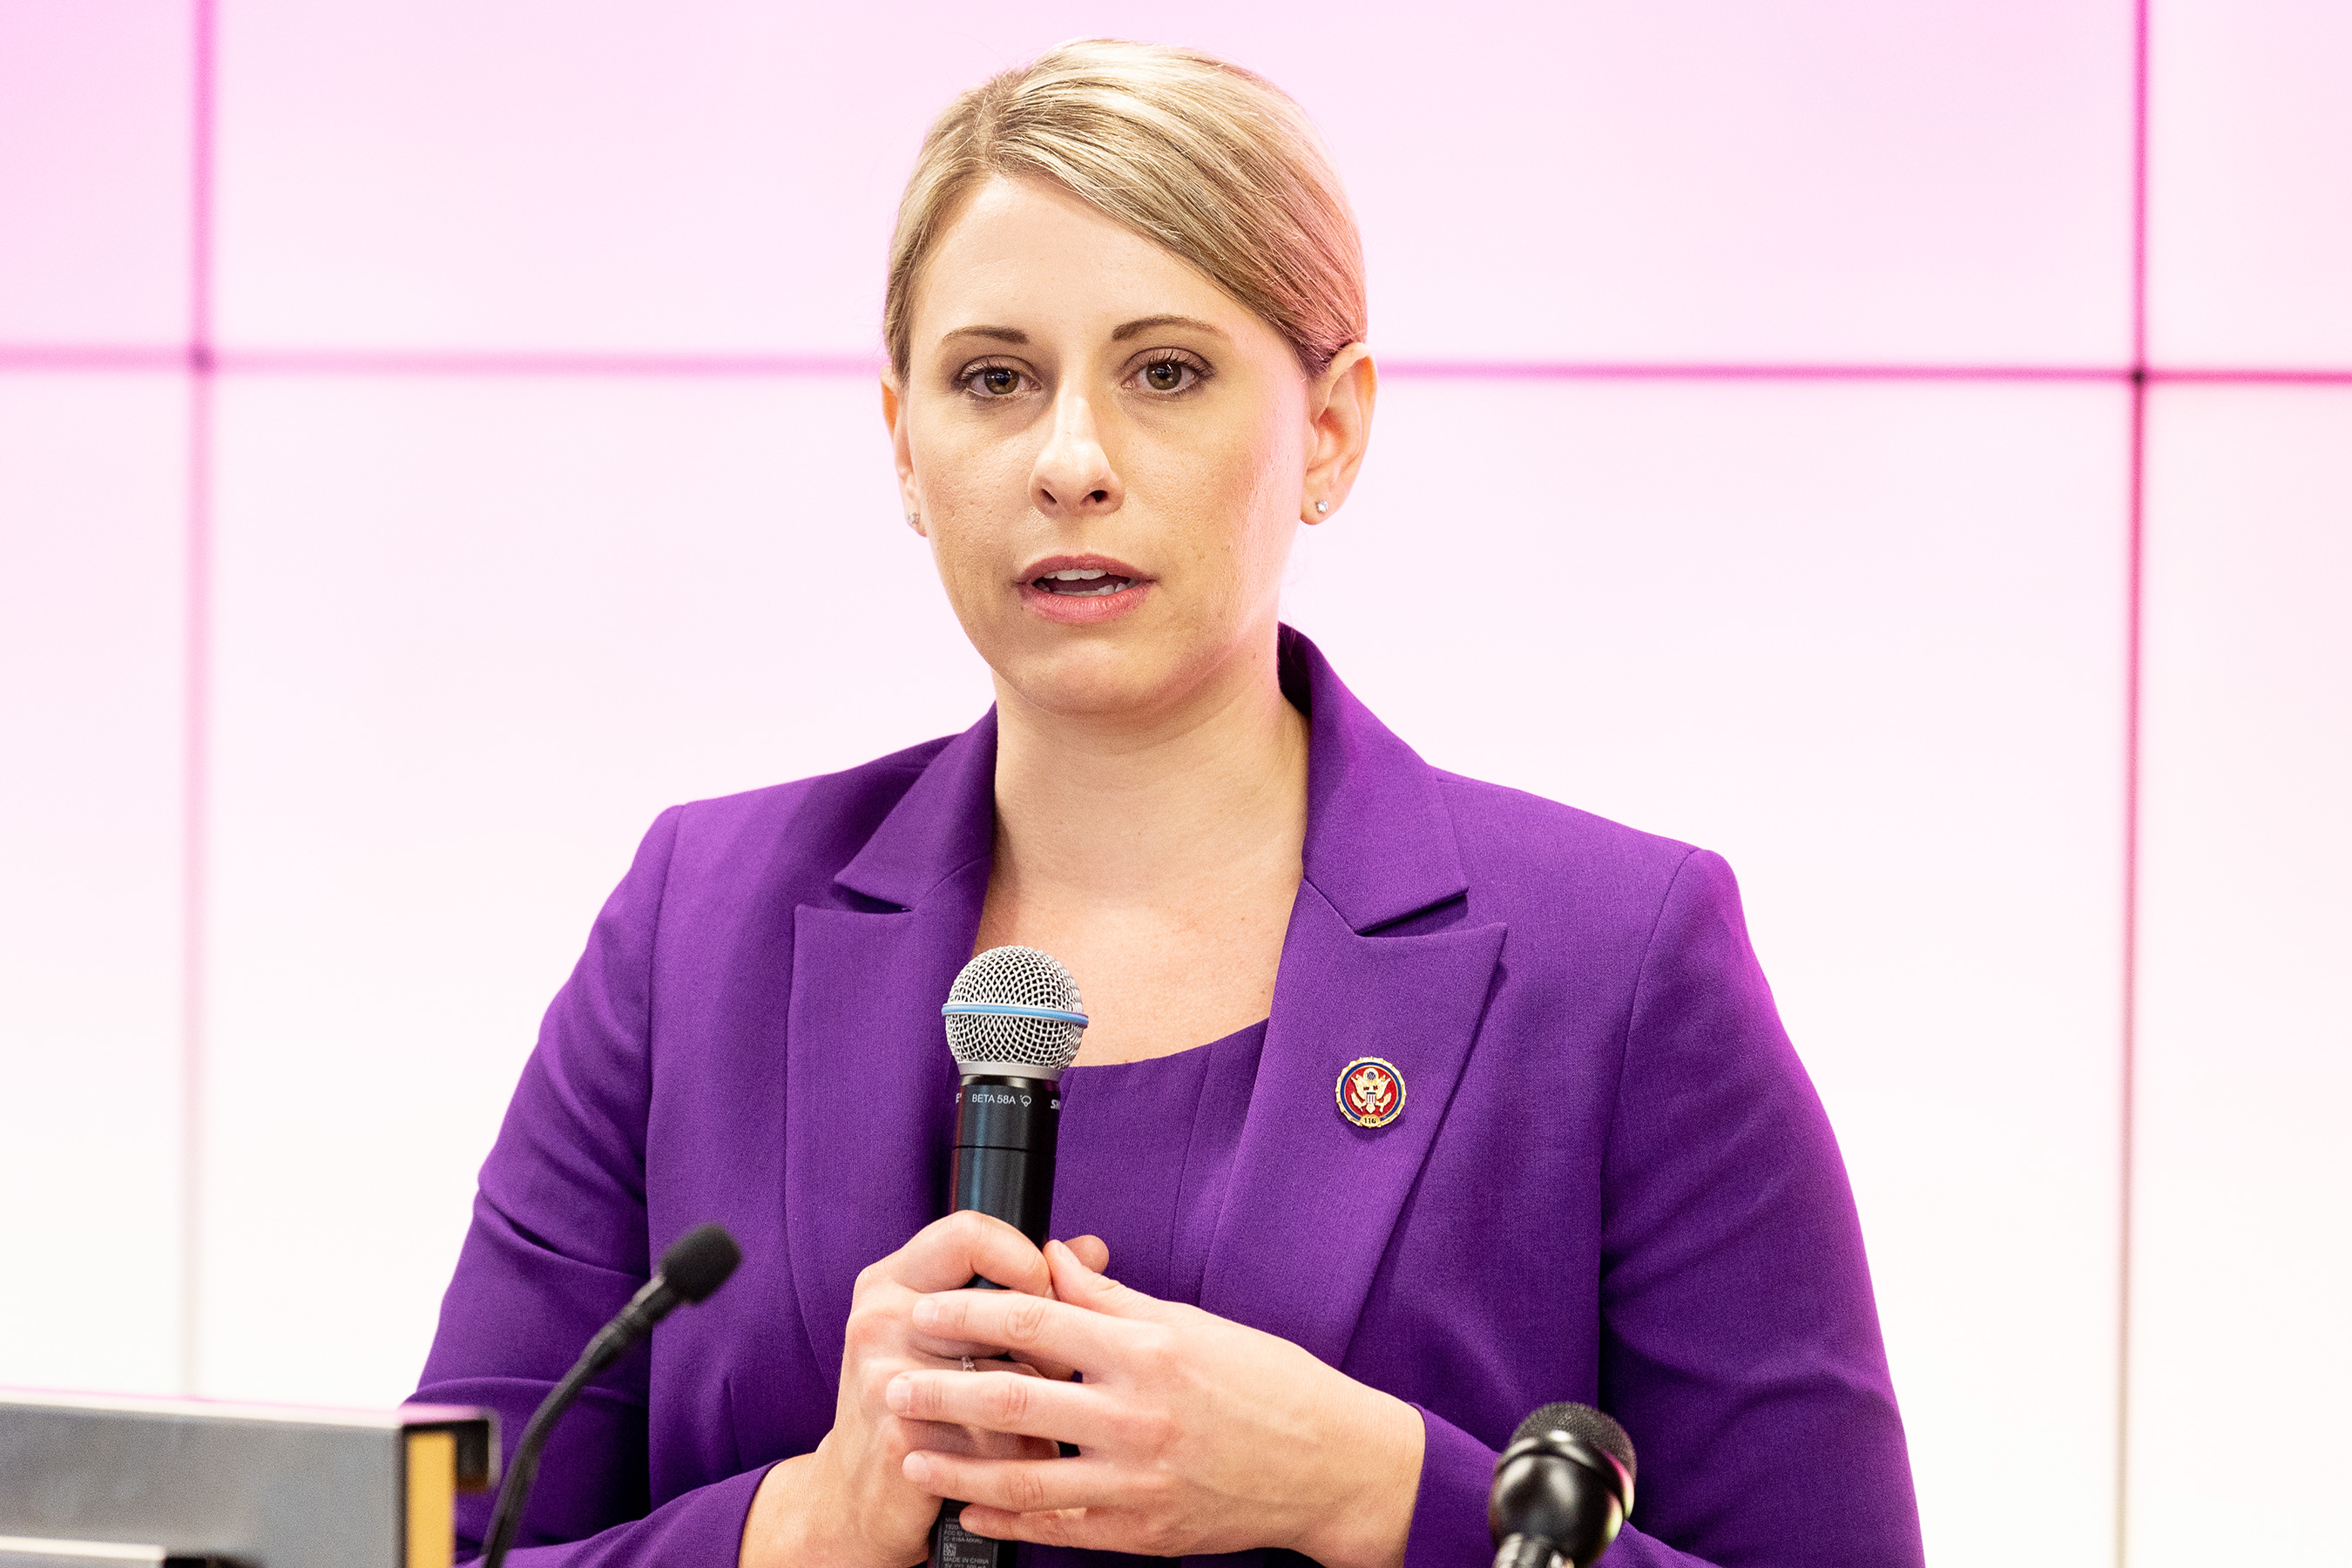 California Congresswoman Katie Hill Admits to Inappropriate Relationship with Campaign Staffer